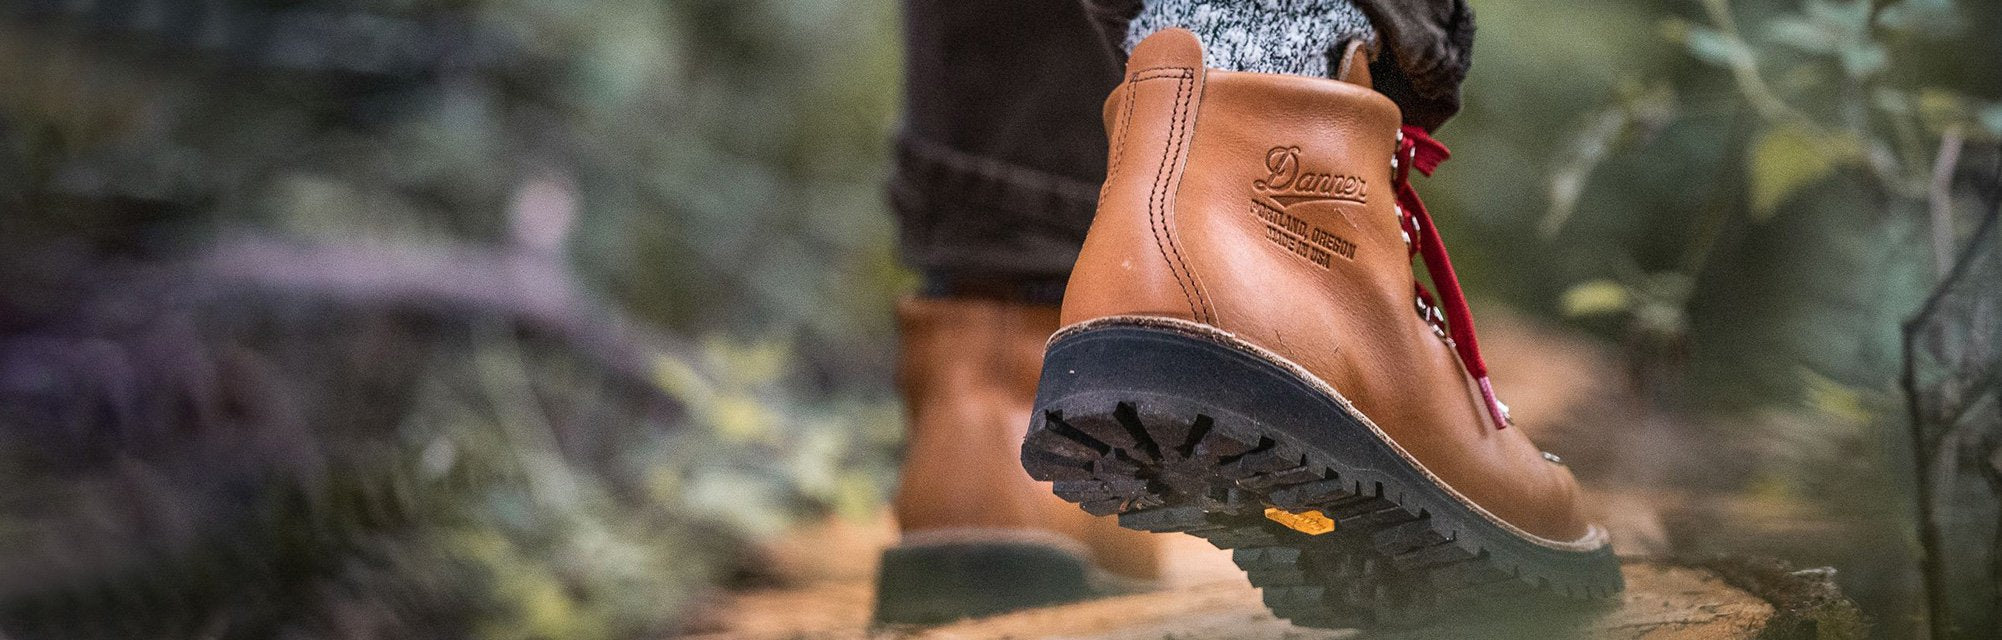 Danner Boots - handmade boots from Portland and made since 1932